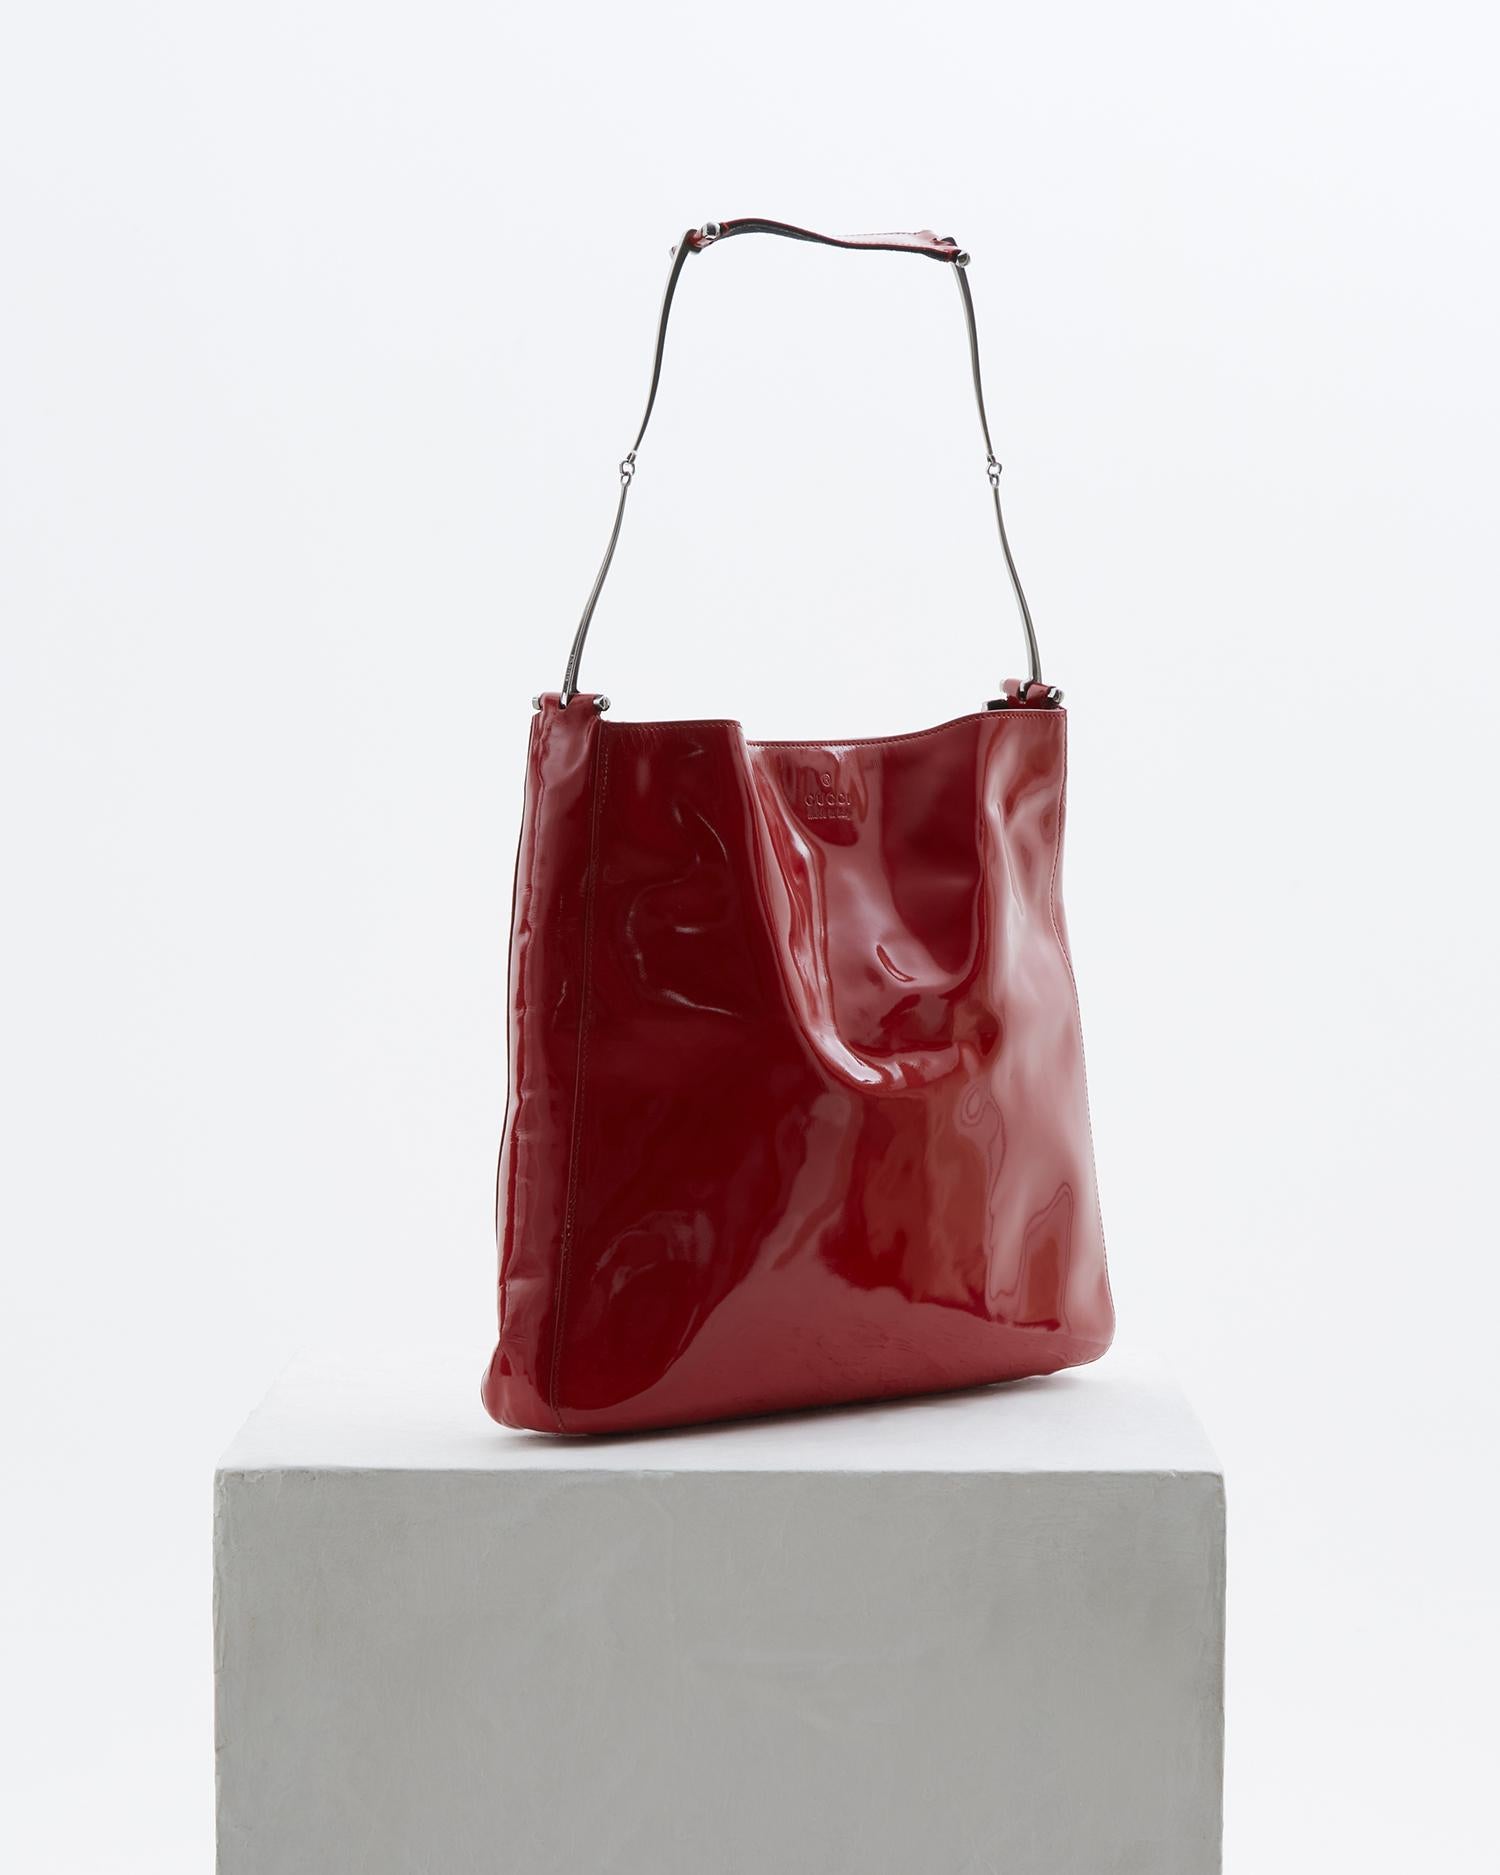 Gucci by Tom Ford red patent leather metal ring shoulder bag, fw 1997  In condizioni buone a Milano, IT